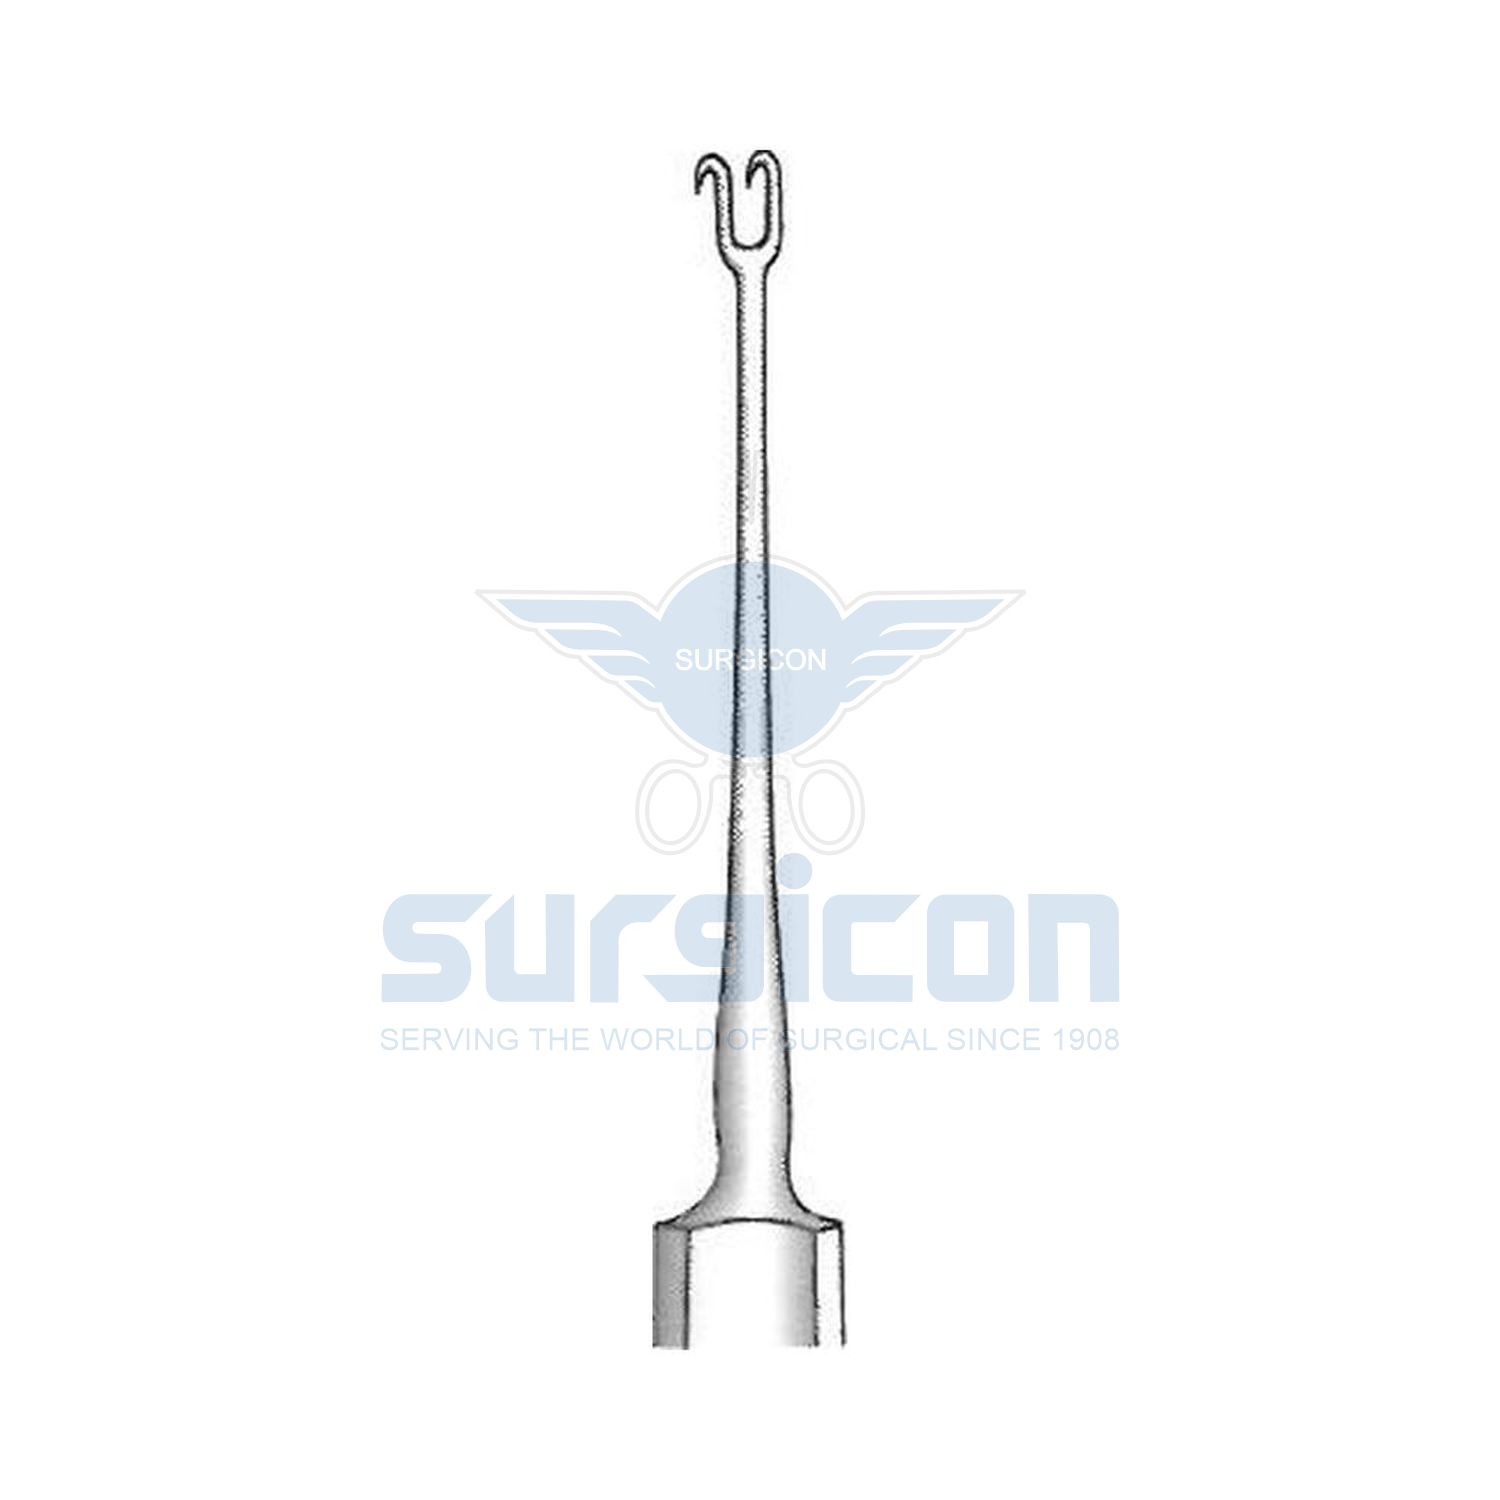 Guthrie-Cystotomes-Iris-Hooks-and-Retractor-J-50-1242